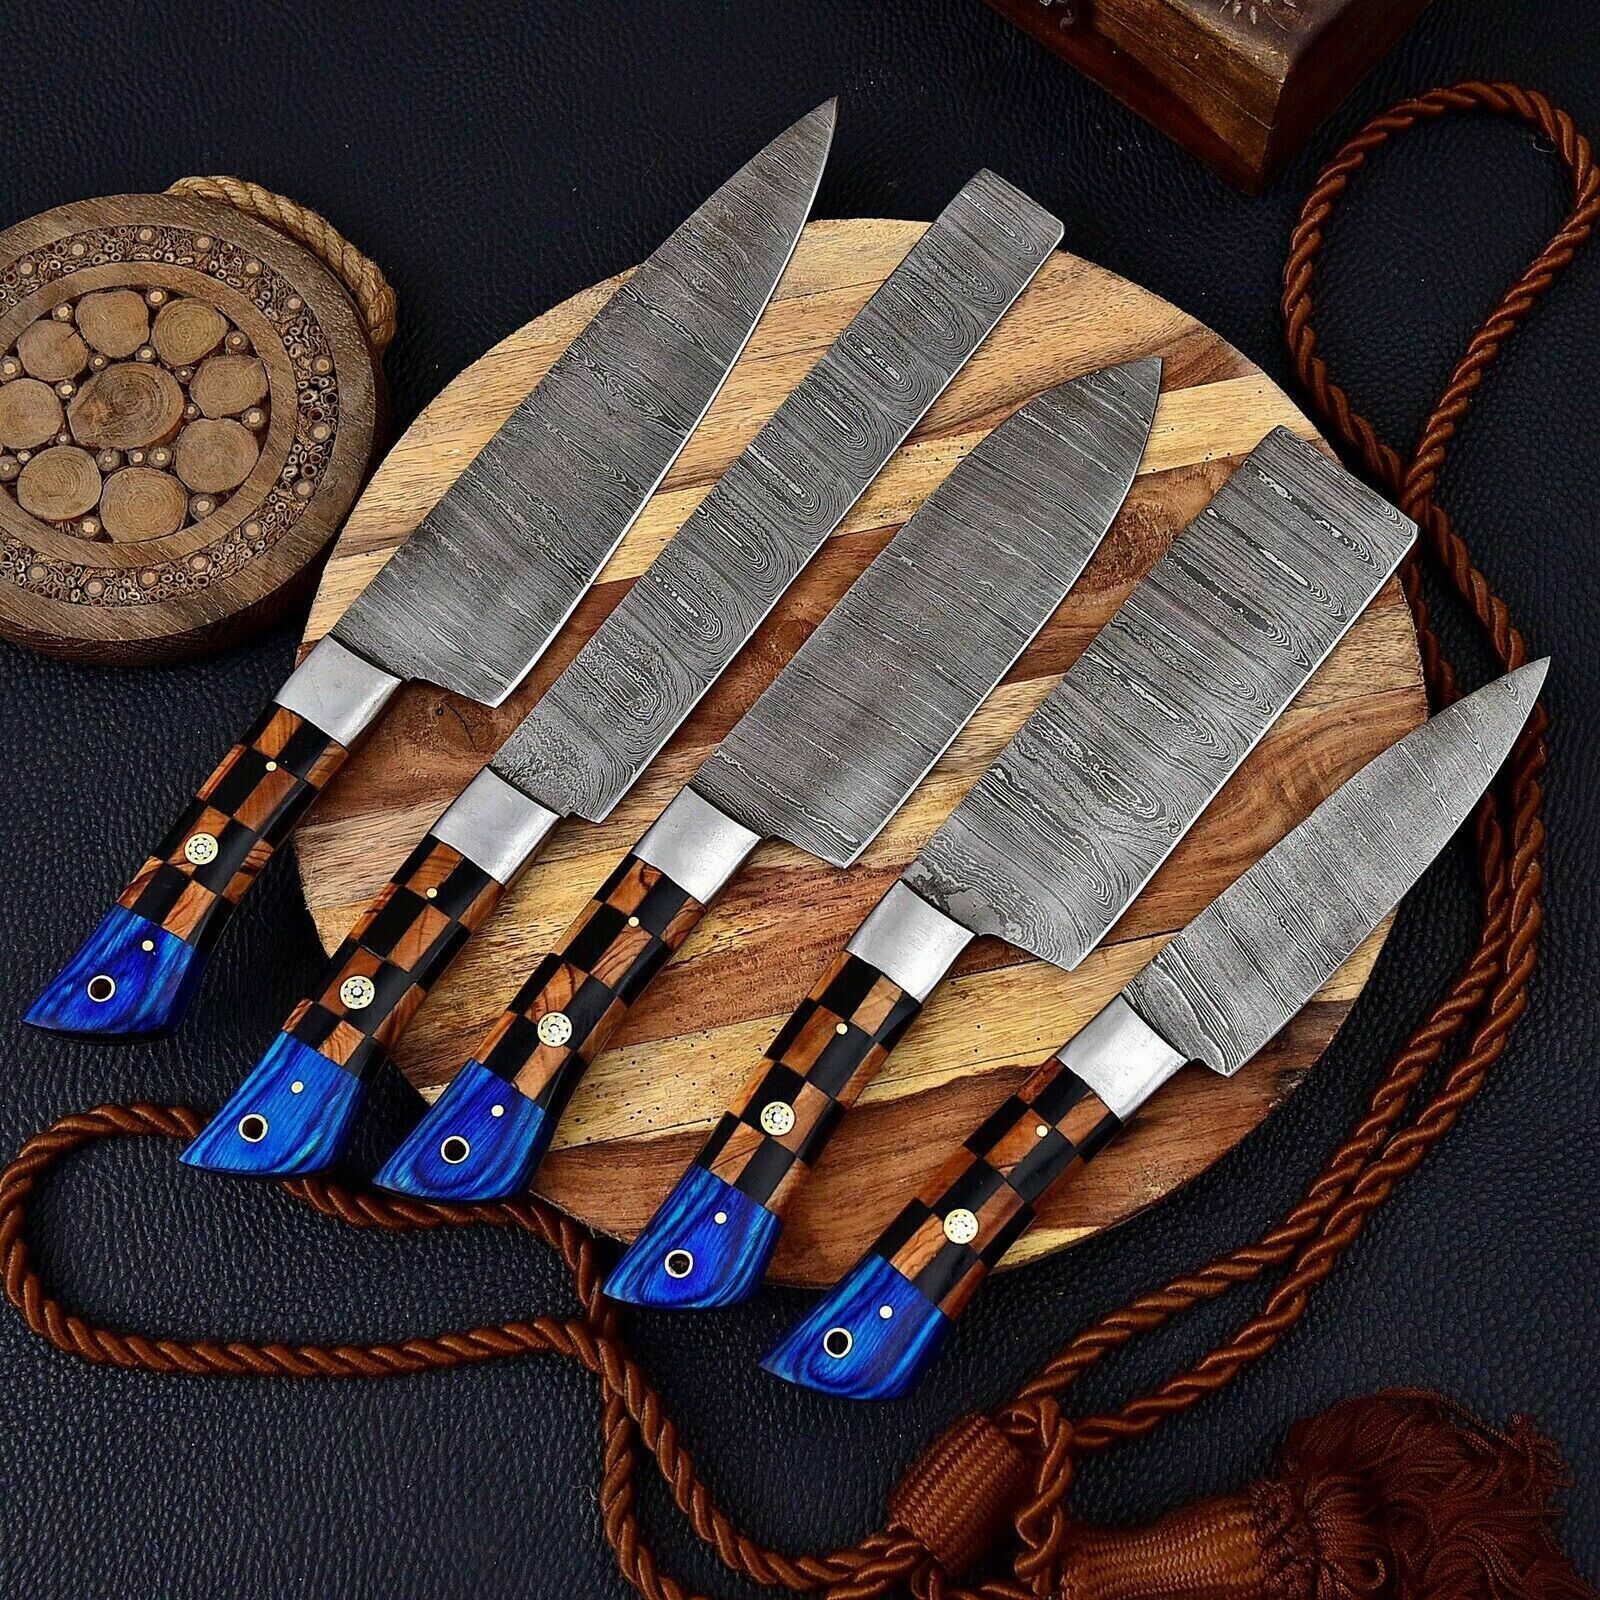 Custom Handmade Damascus Steel 5pcs kitchen Set With Mix and color Wood handle